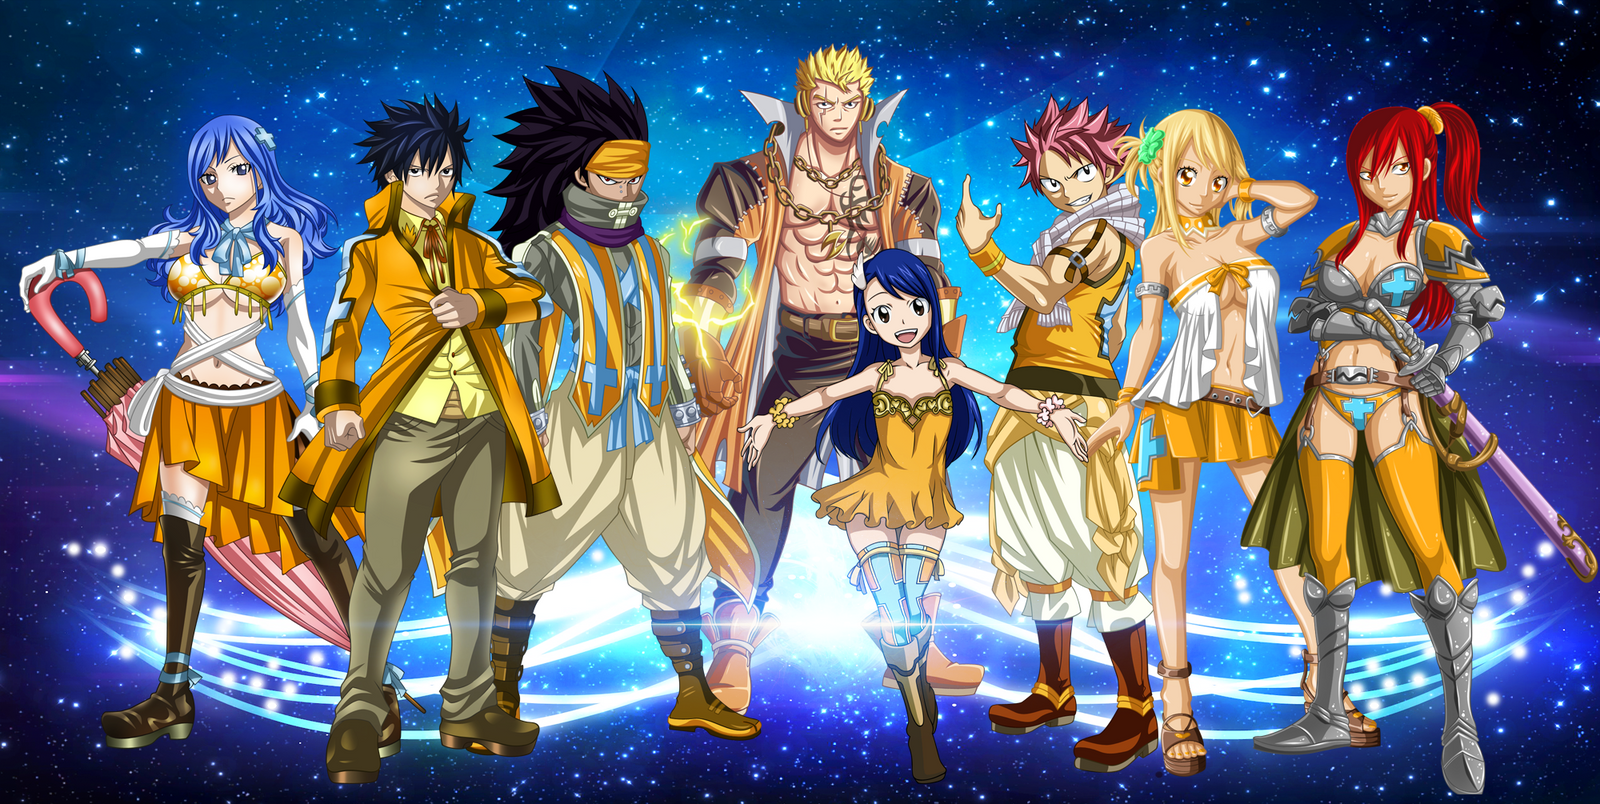 we_are_fairytail_by_sal_88-d5ersvm.png